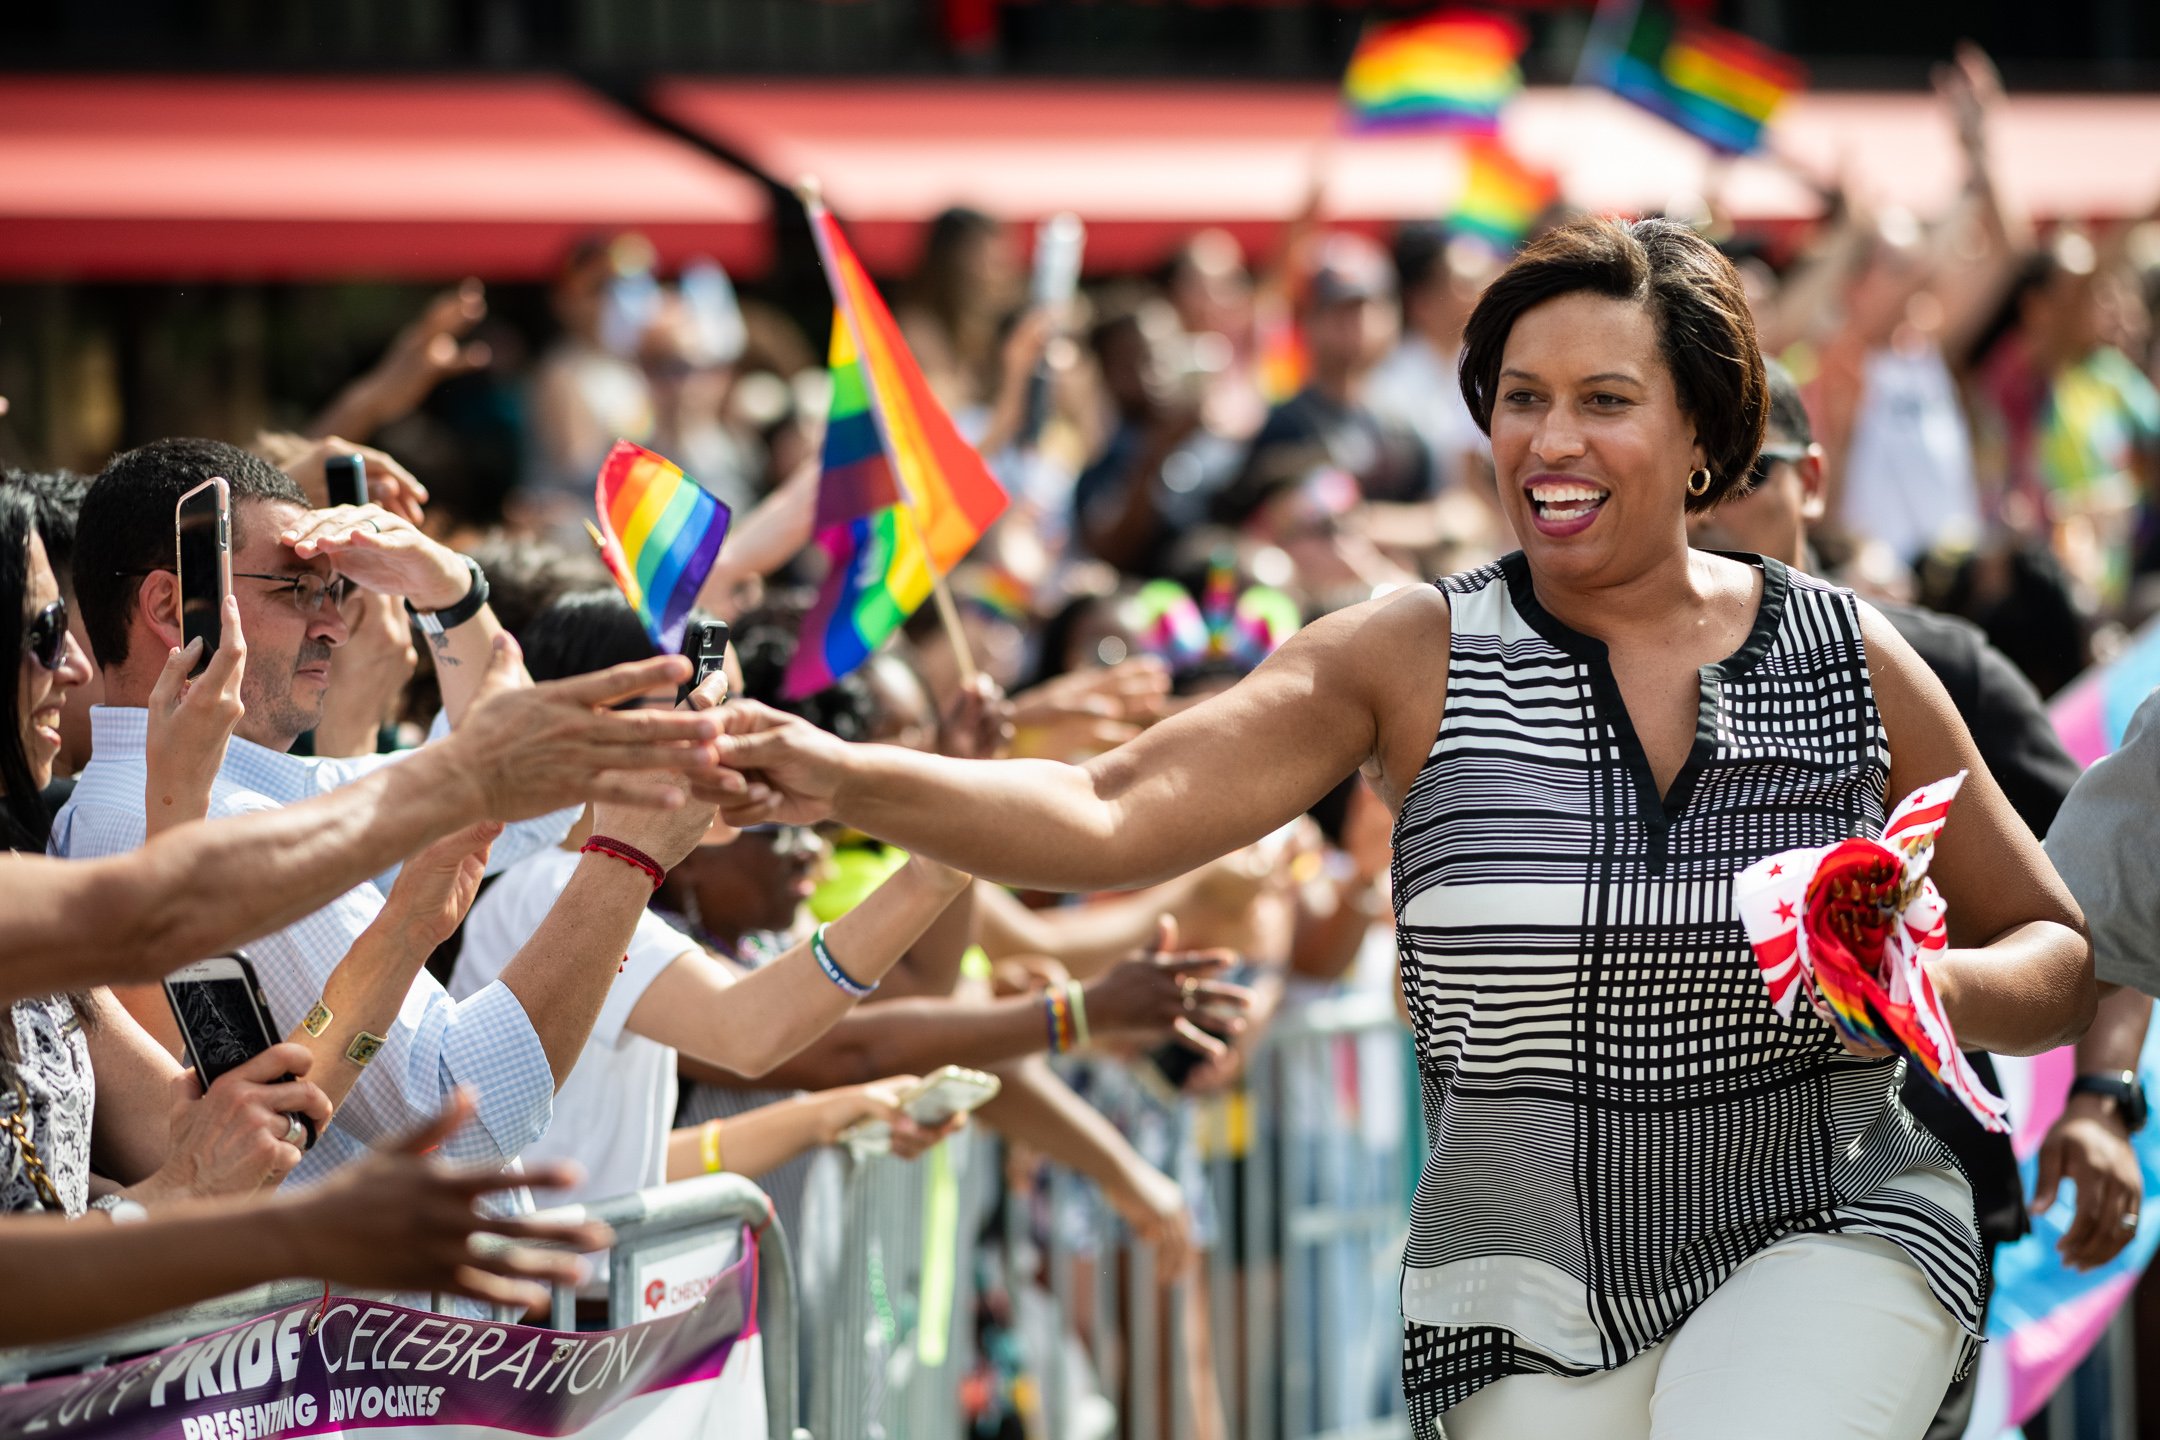  Washington Mayor Muriel Bowser runs along the Capital Pride Parade route with pride flags in hand, near Dupont Circle, in Washington, D.C., on June 8, 2019. (Photo by Graeme Sloan) 